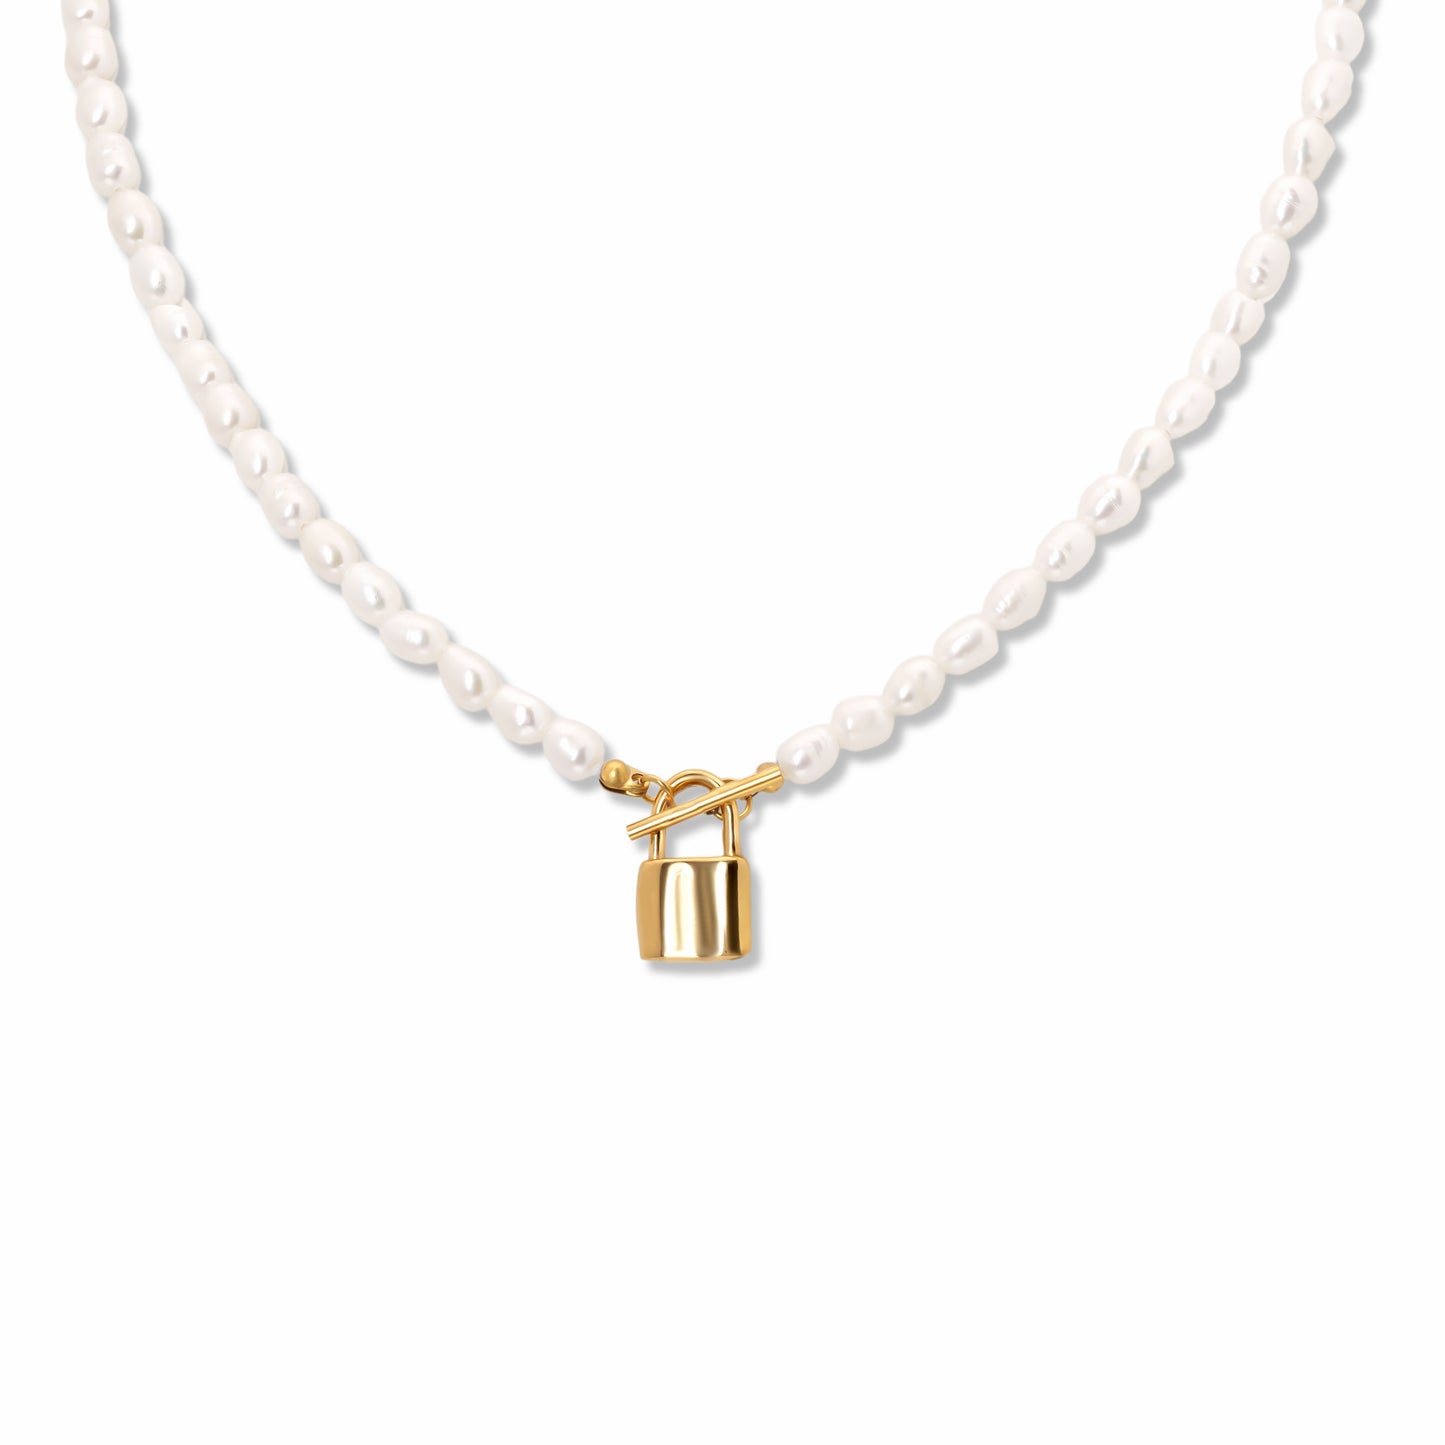 Padlock Pearl Necklace on white background. Close up image of gold padlock closure.